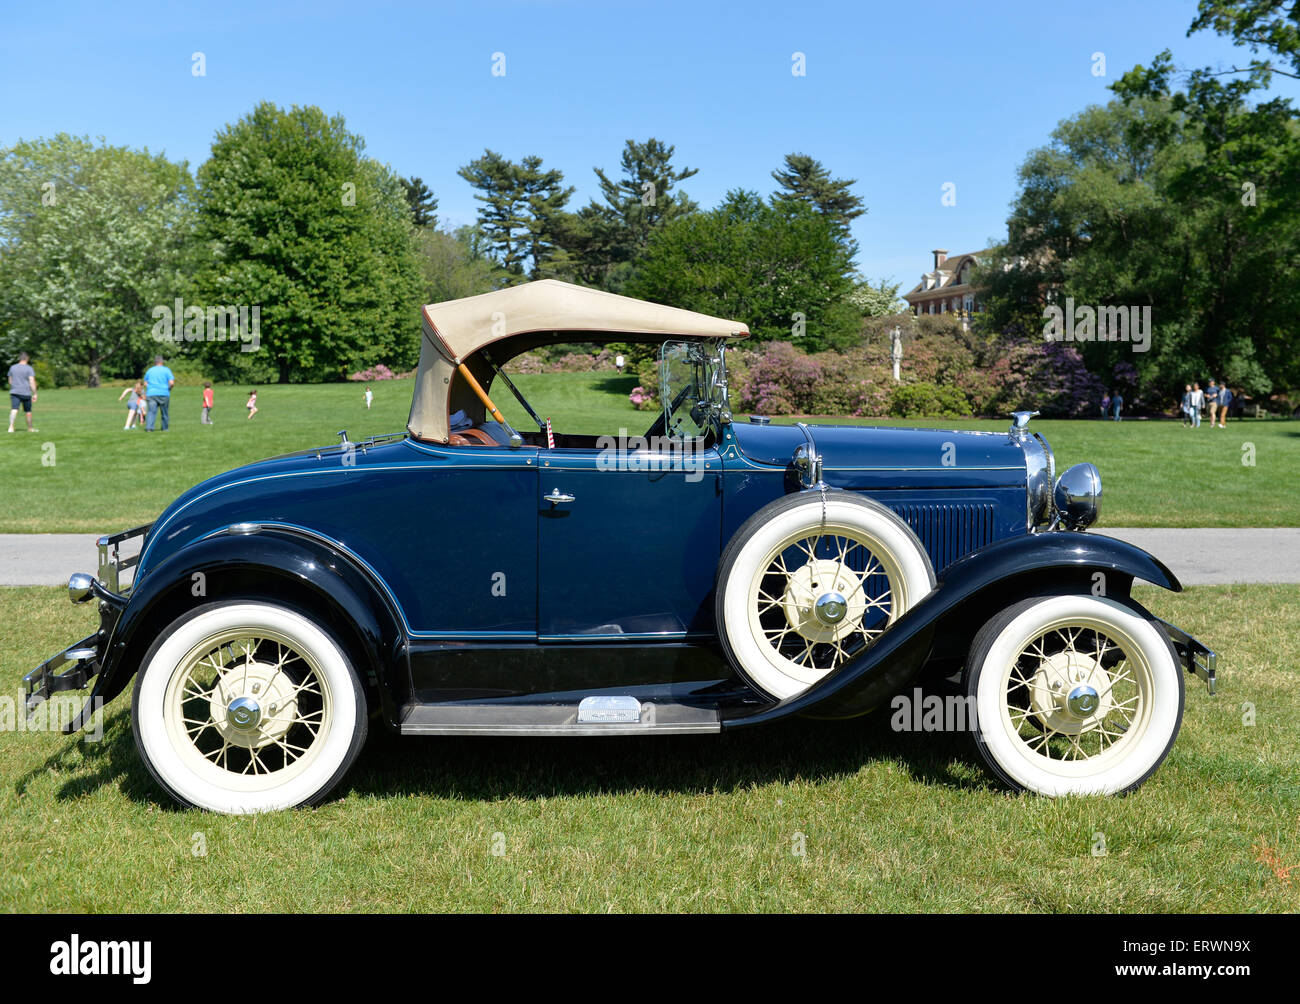 Old Westbury, New York, United States. 7th June 2015. A blue 1931 Ford Model A roadster with white wall tires, owned by Roger F. Clark of Kings Park, is shown at the 50th Annual Spring Meet Car Show sponsored by Greater New York Region Antique Automobile Club of America. Over 1,000 antique, classic, and custom cars participated at the popular Long Island vintage car show held at historic Old Westbury Gardens. Stock Photo